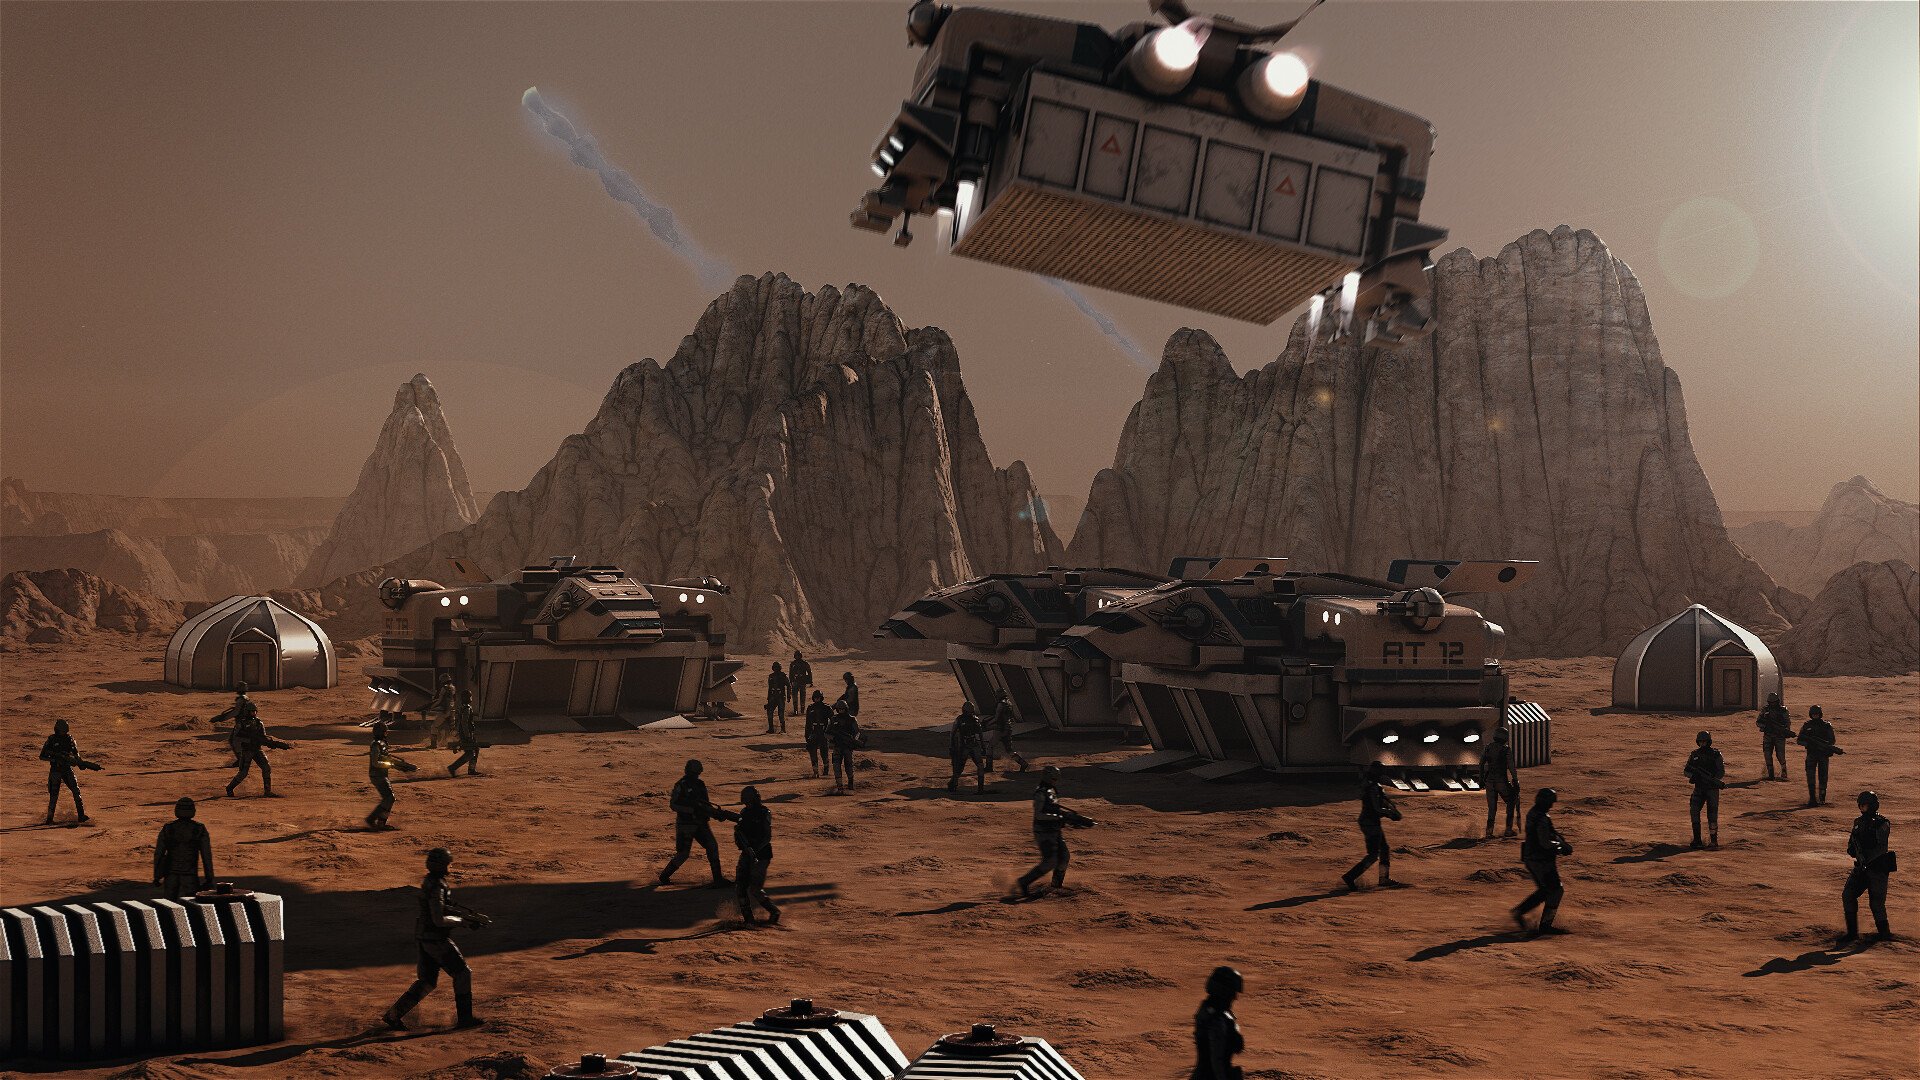 Starship Troopers Terran Command scenes assembly, animation and render for game trailer